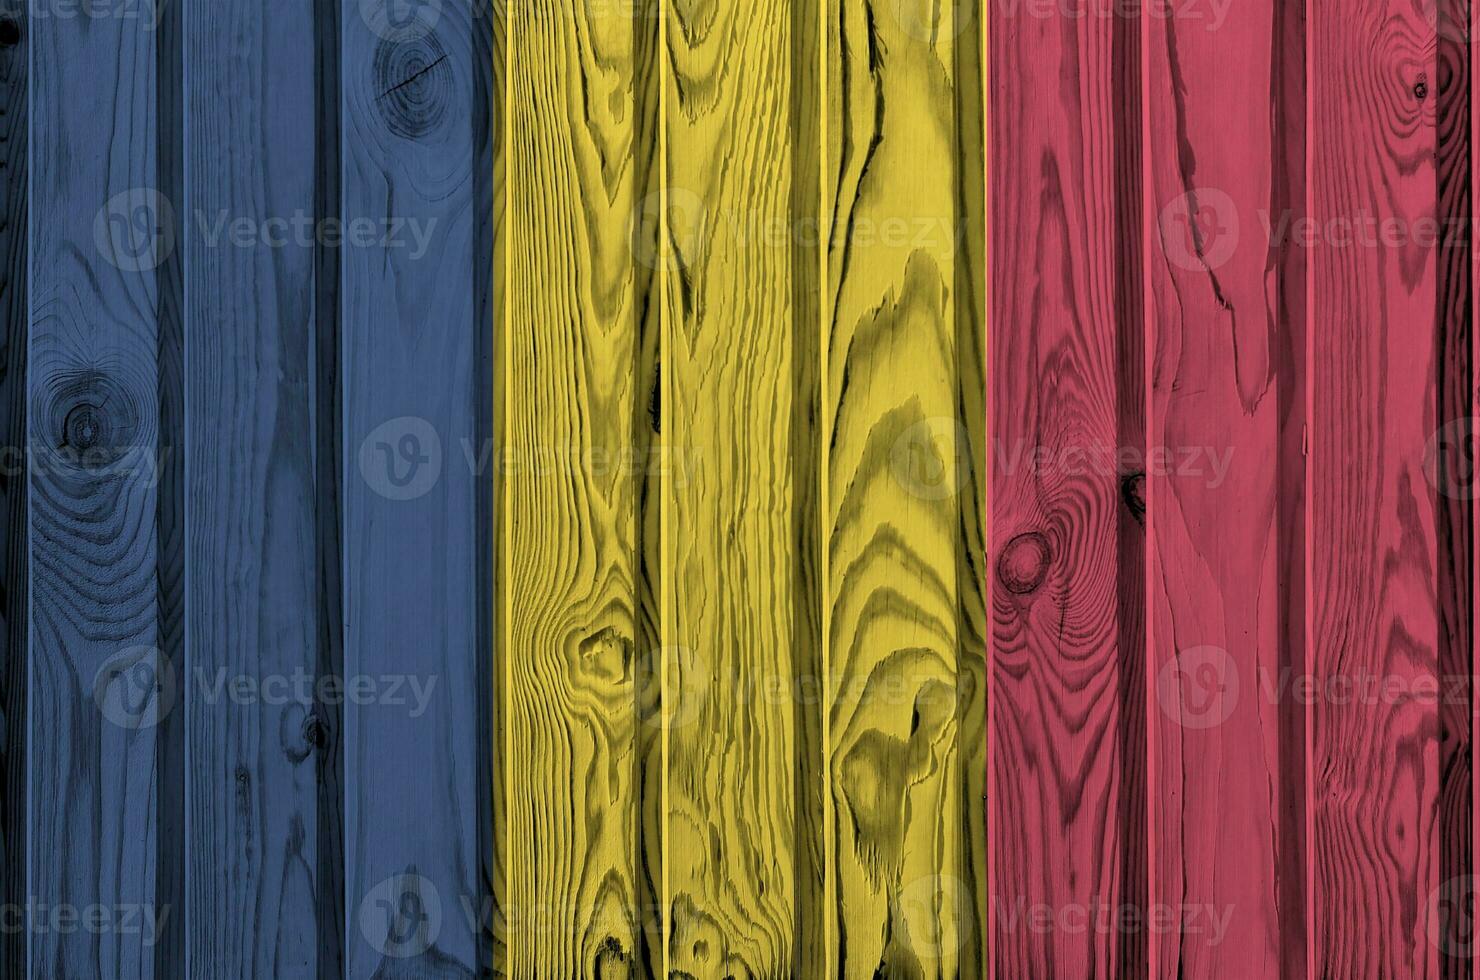 Chad flag depicted in bright paint colors on old wooden wall. Textured banner on rough background photo